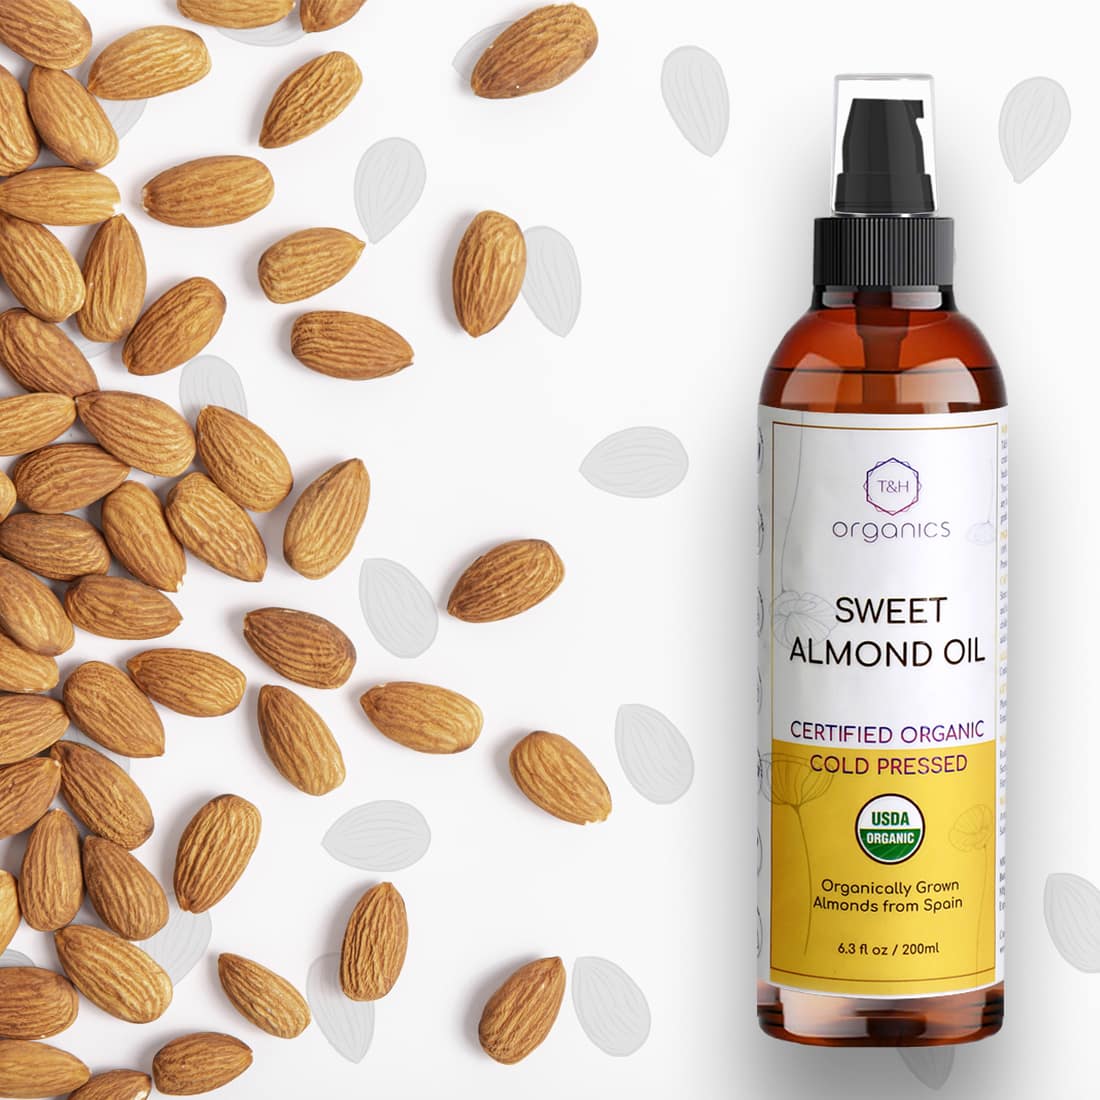 Sweet Almond Oil Product